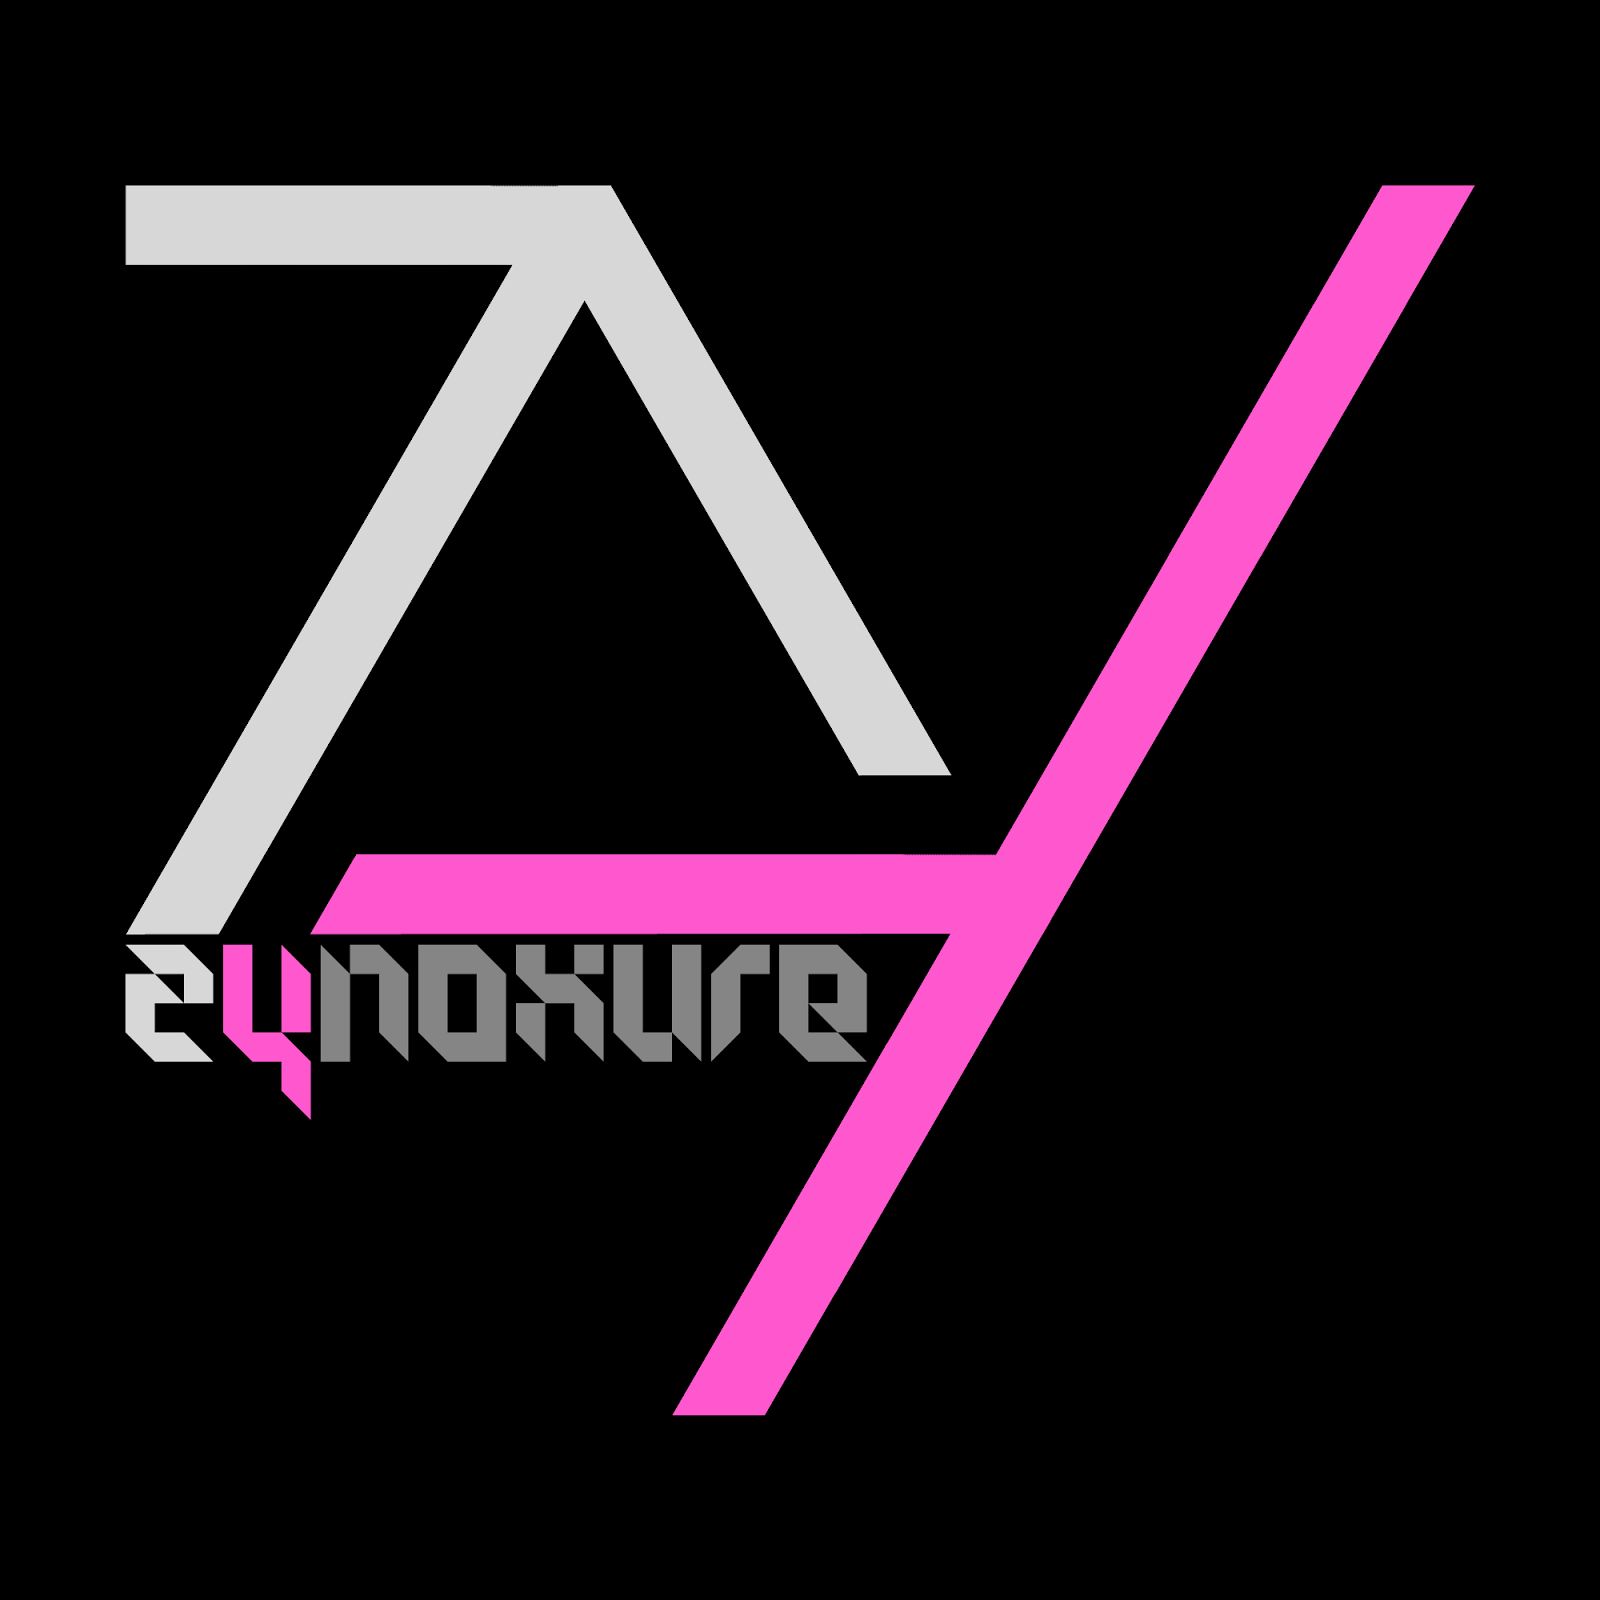 WELCOME TO ZYNOXURE!